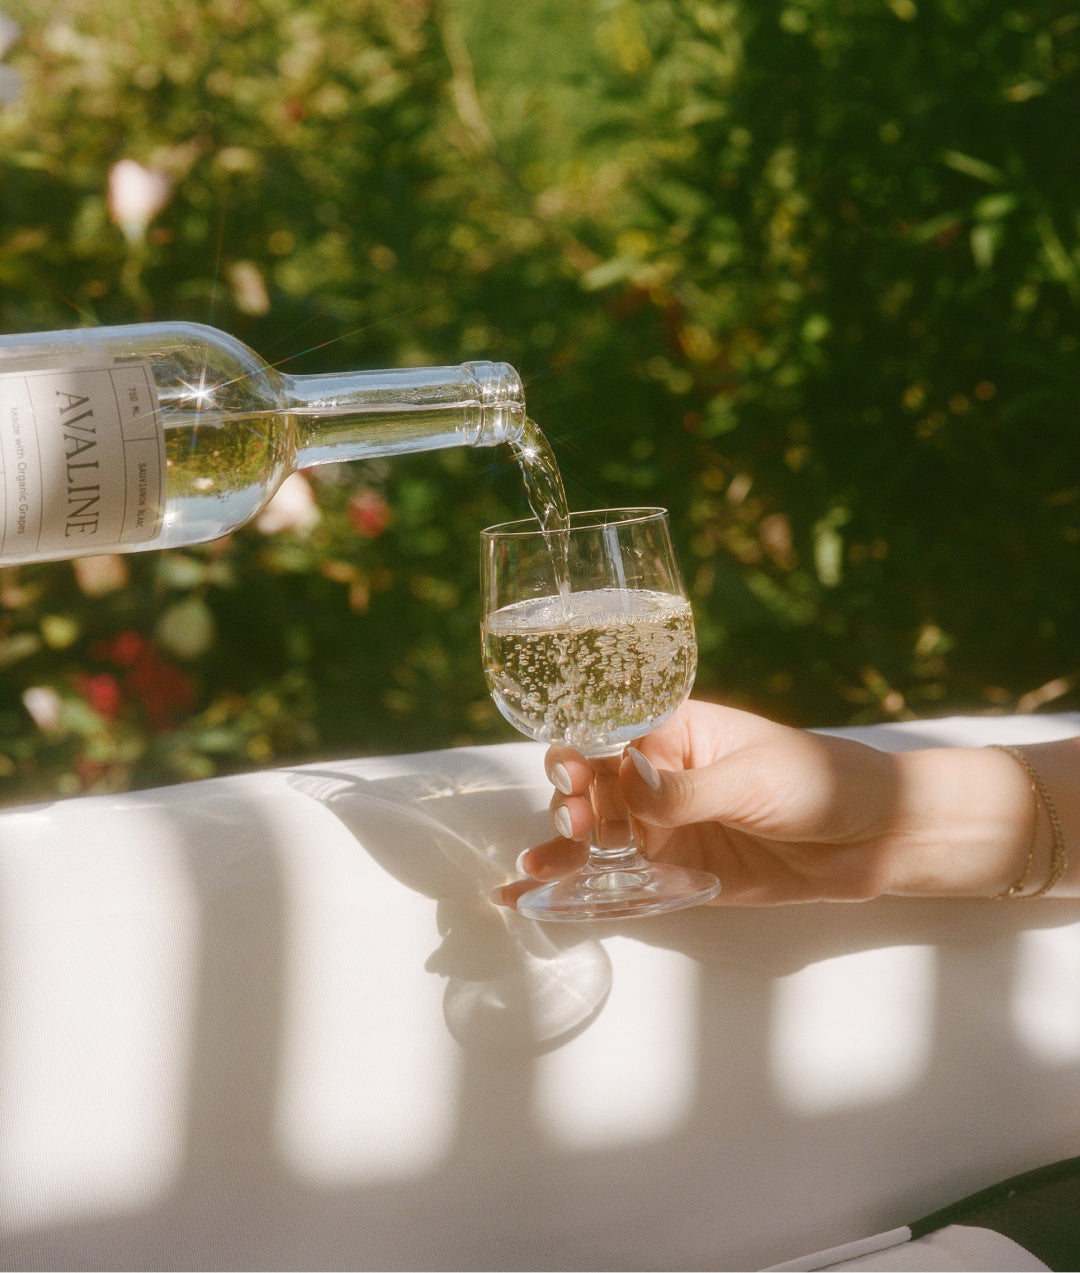 An image of a bottle of Sauvignon Blanc being poured into a wine glass held by a woman’s hand, with greenery and flowers in the background.